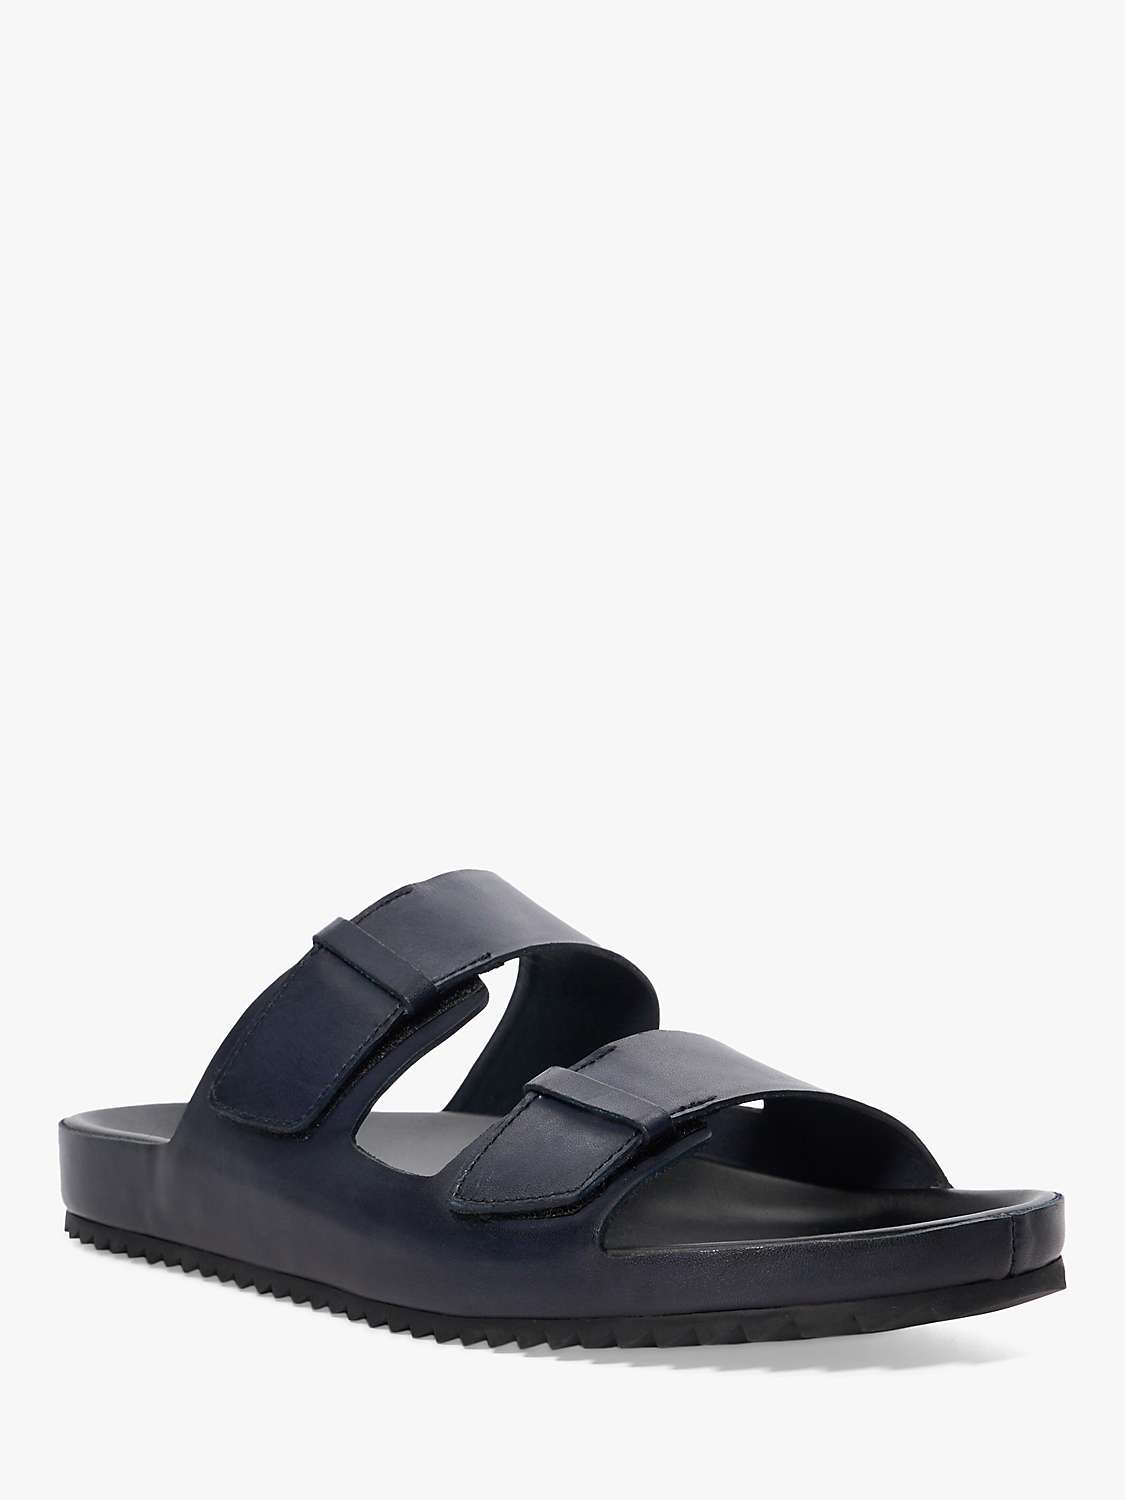 Buy Dune Intells Leather Double Strap Sandals, Navy Online at johnlewis.com